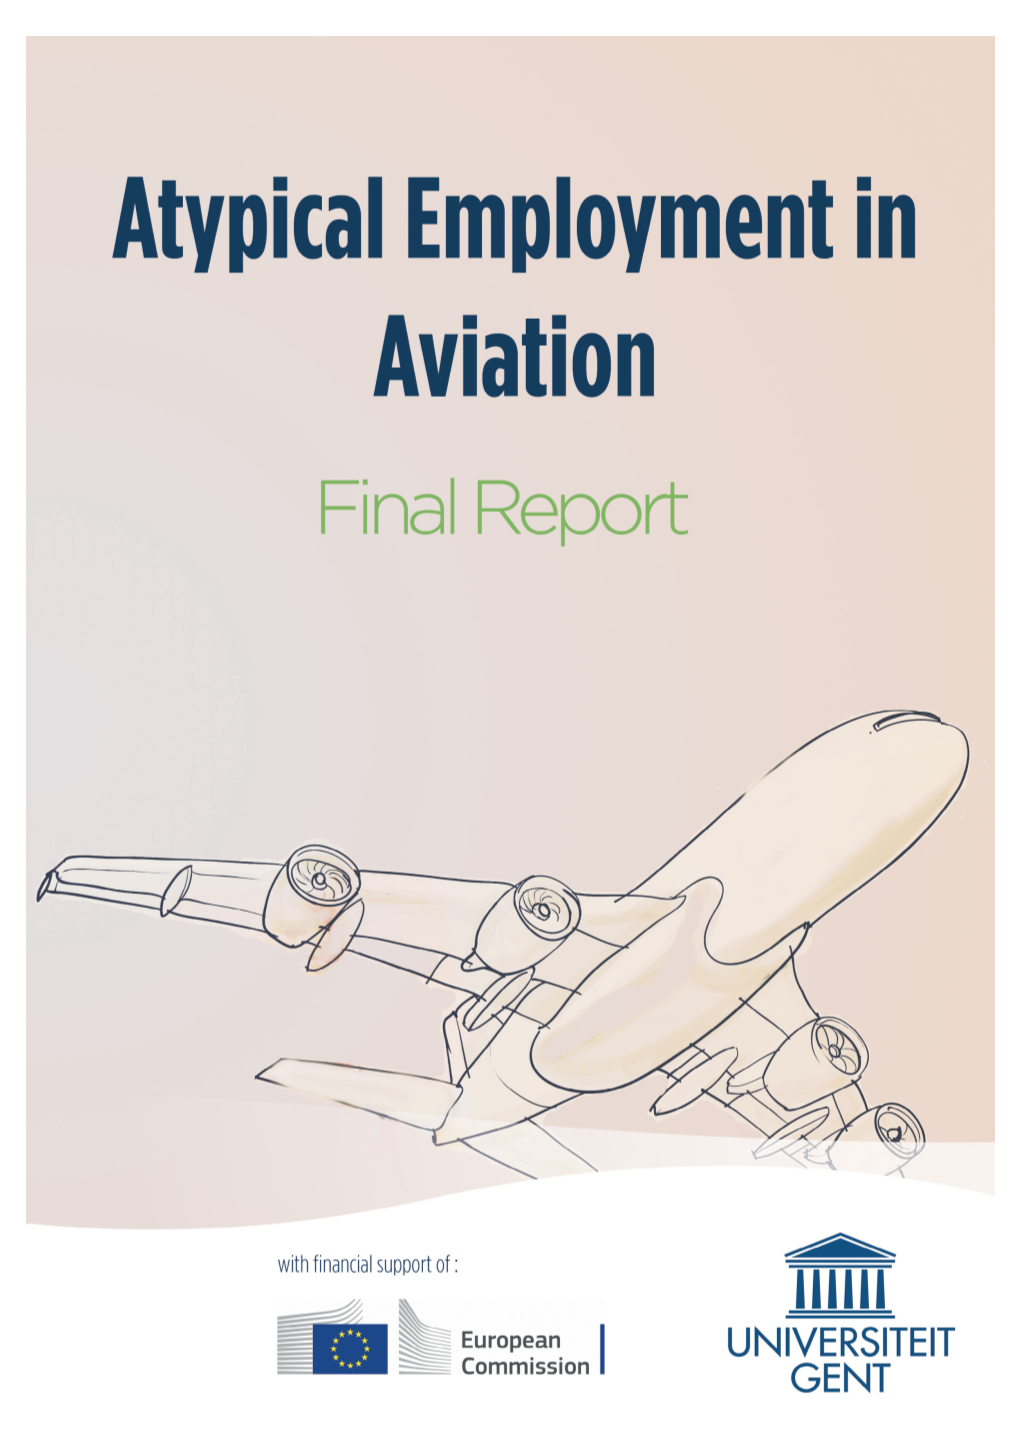 Final Report: Atypical Employment in Aviation